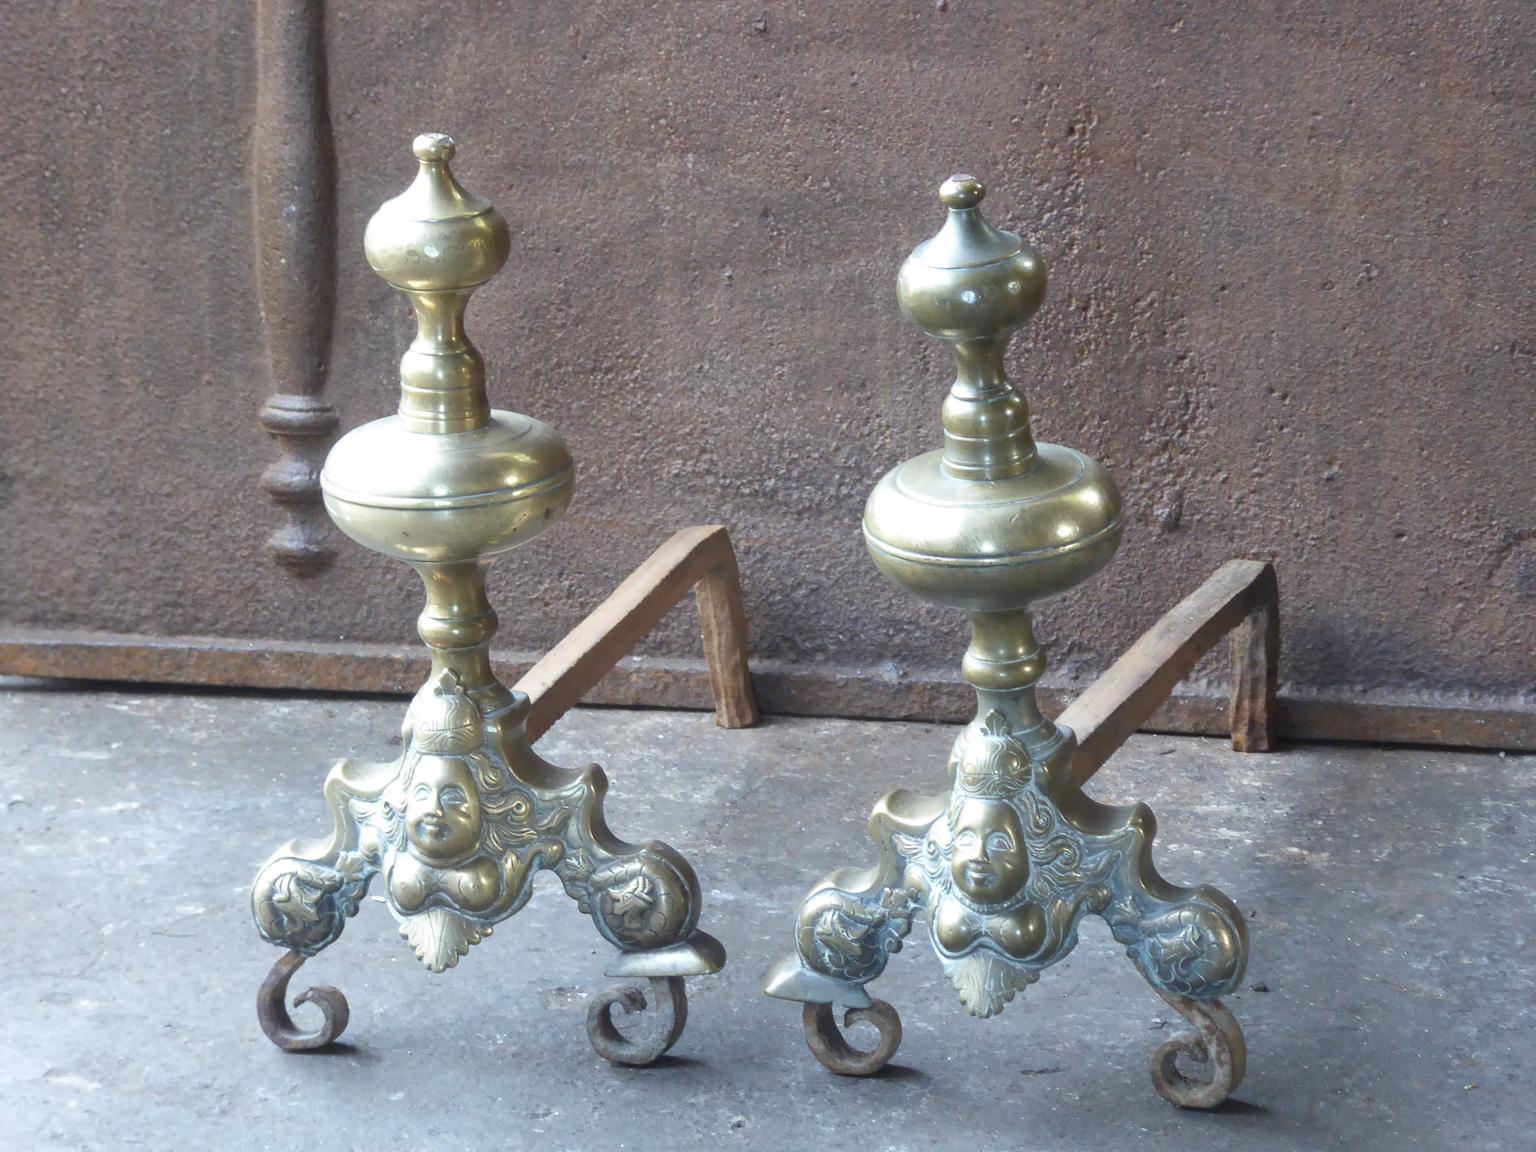 17th century French Louis XIV andirons. The andirons are made of bronze and wrought iron. They have a typical Louis XIV design which was popular during the 17th century. In France they are called marmousets, which means jesters, professional jokers